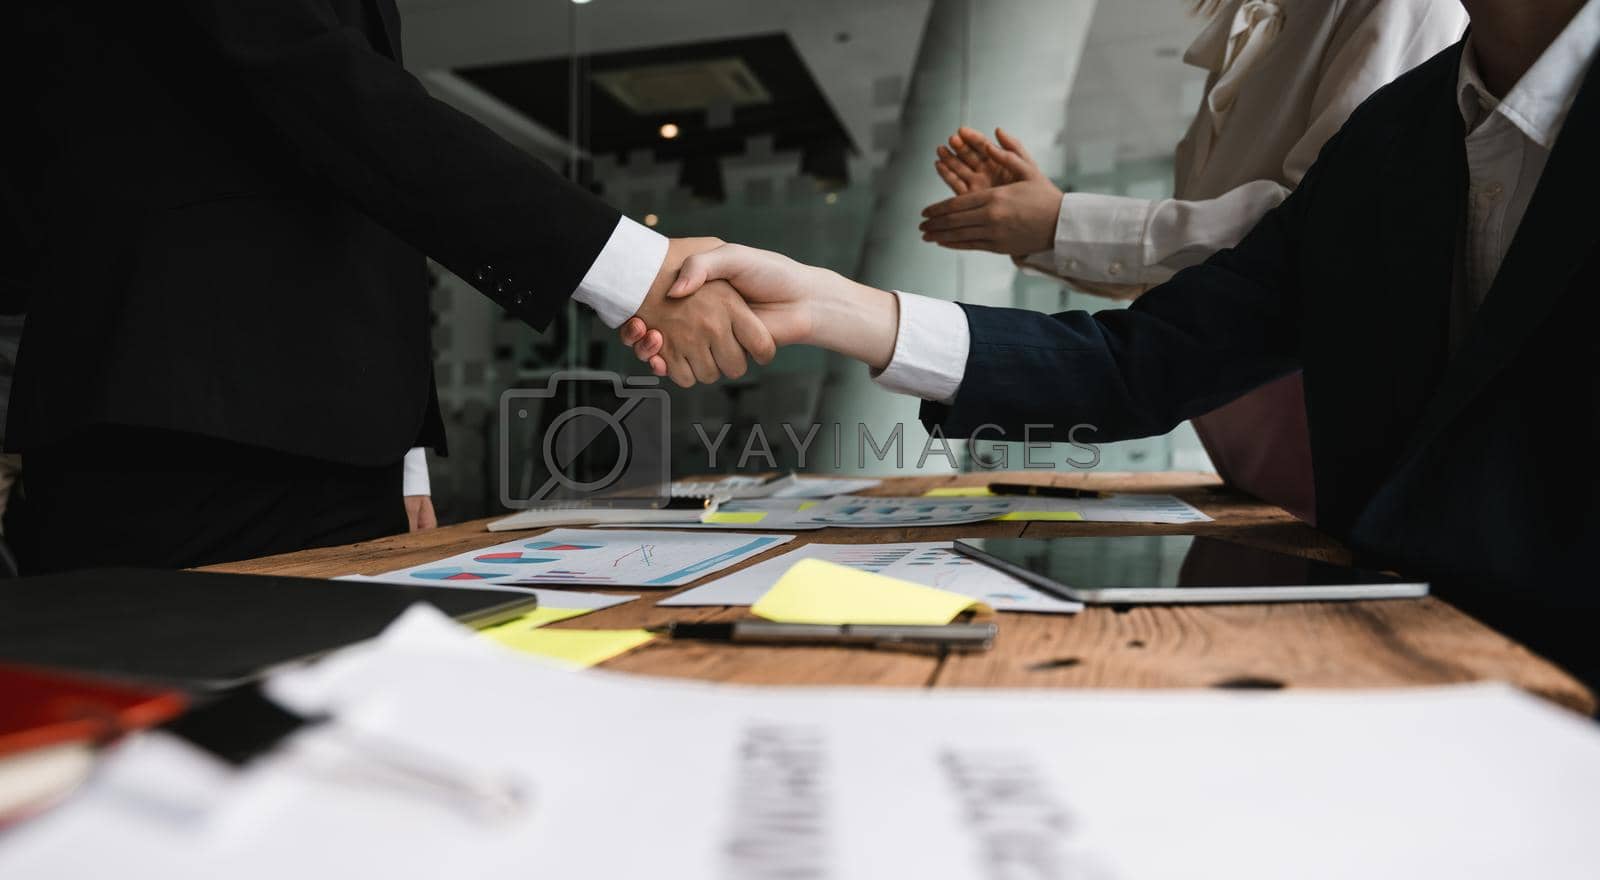 Royalty free image of Business people shaking hands, finishing up meeting, business etiquette, congratulation, merger and acquisition concept by nateemee